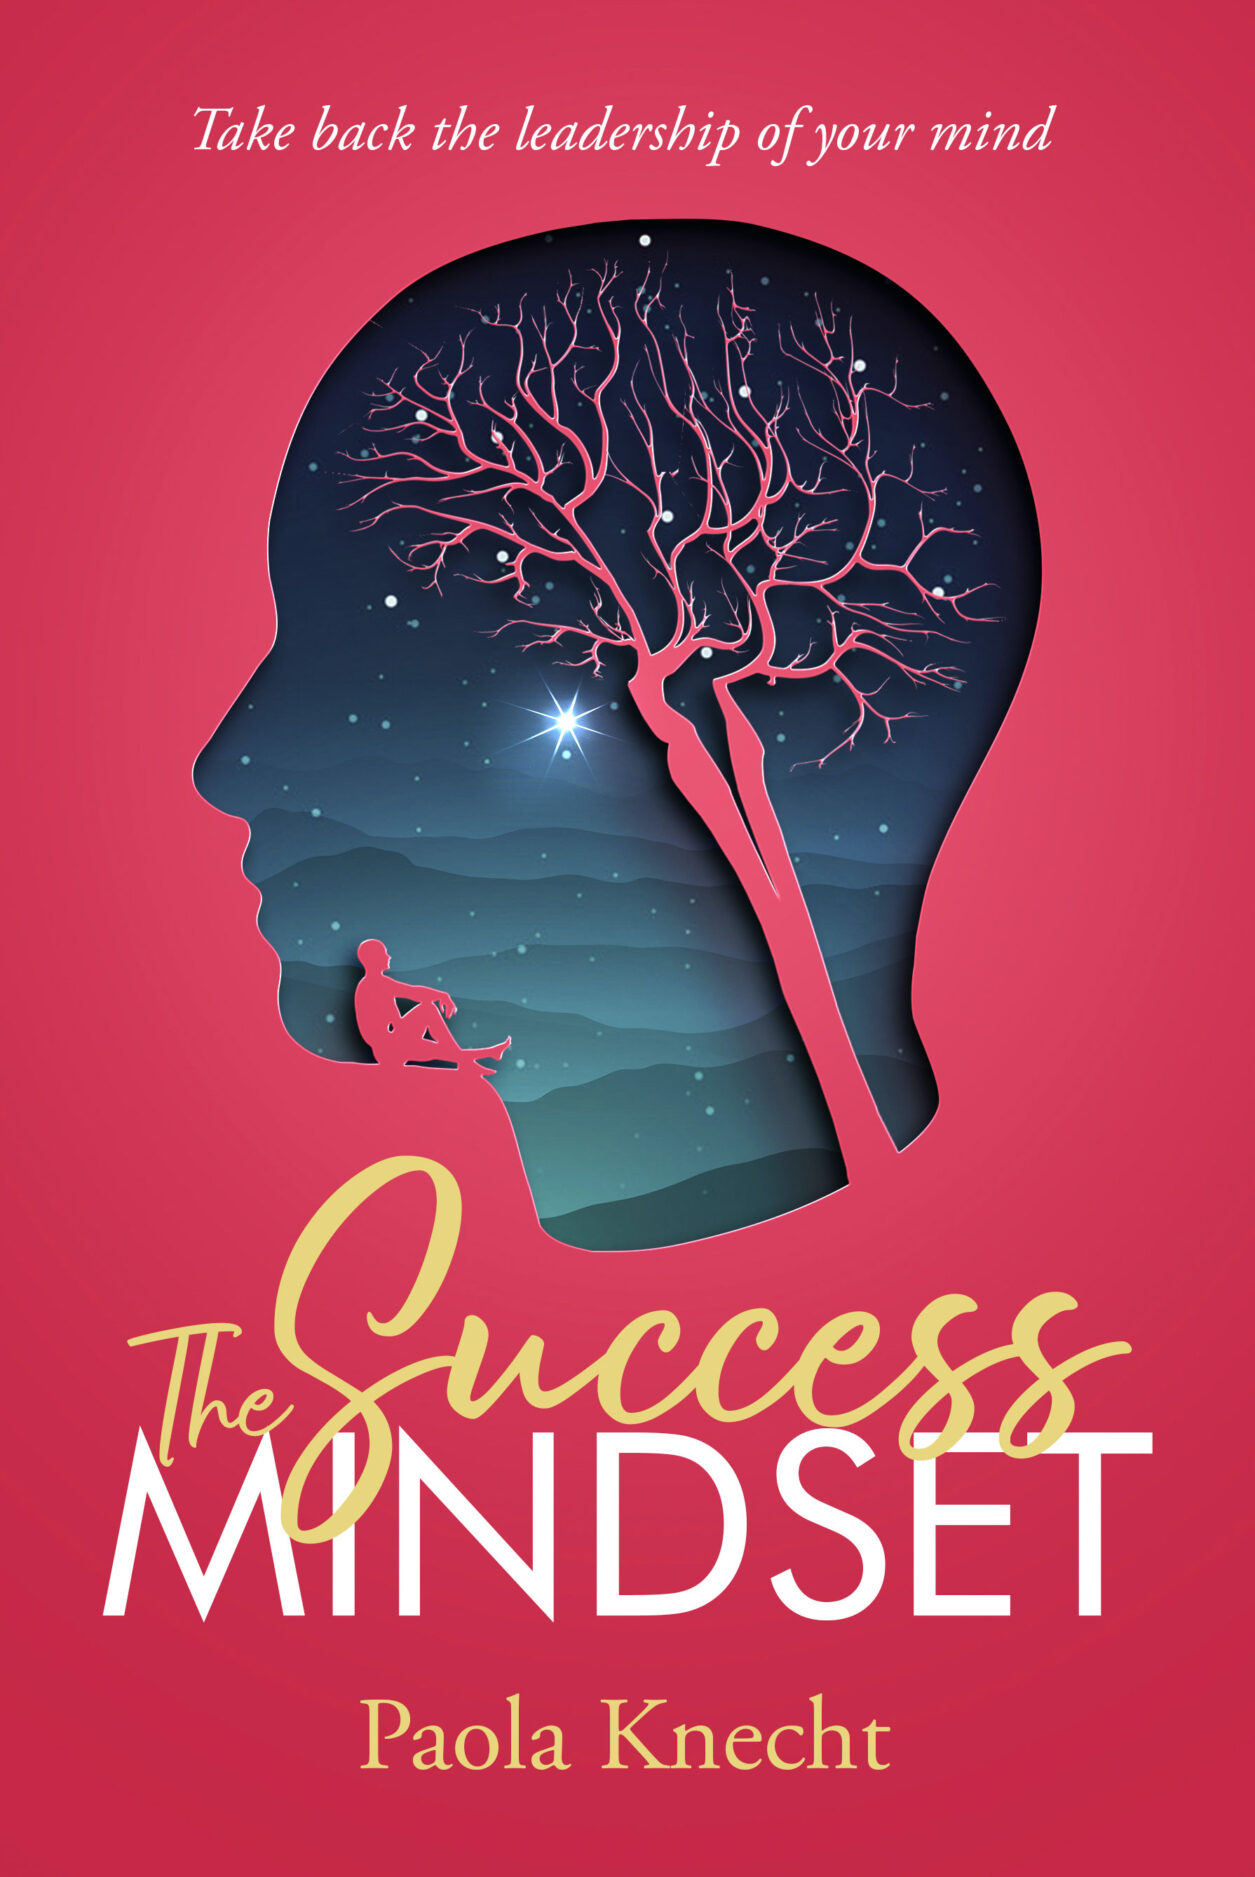 The Success Mindset: Take Back the Leadership of Your Mind